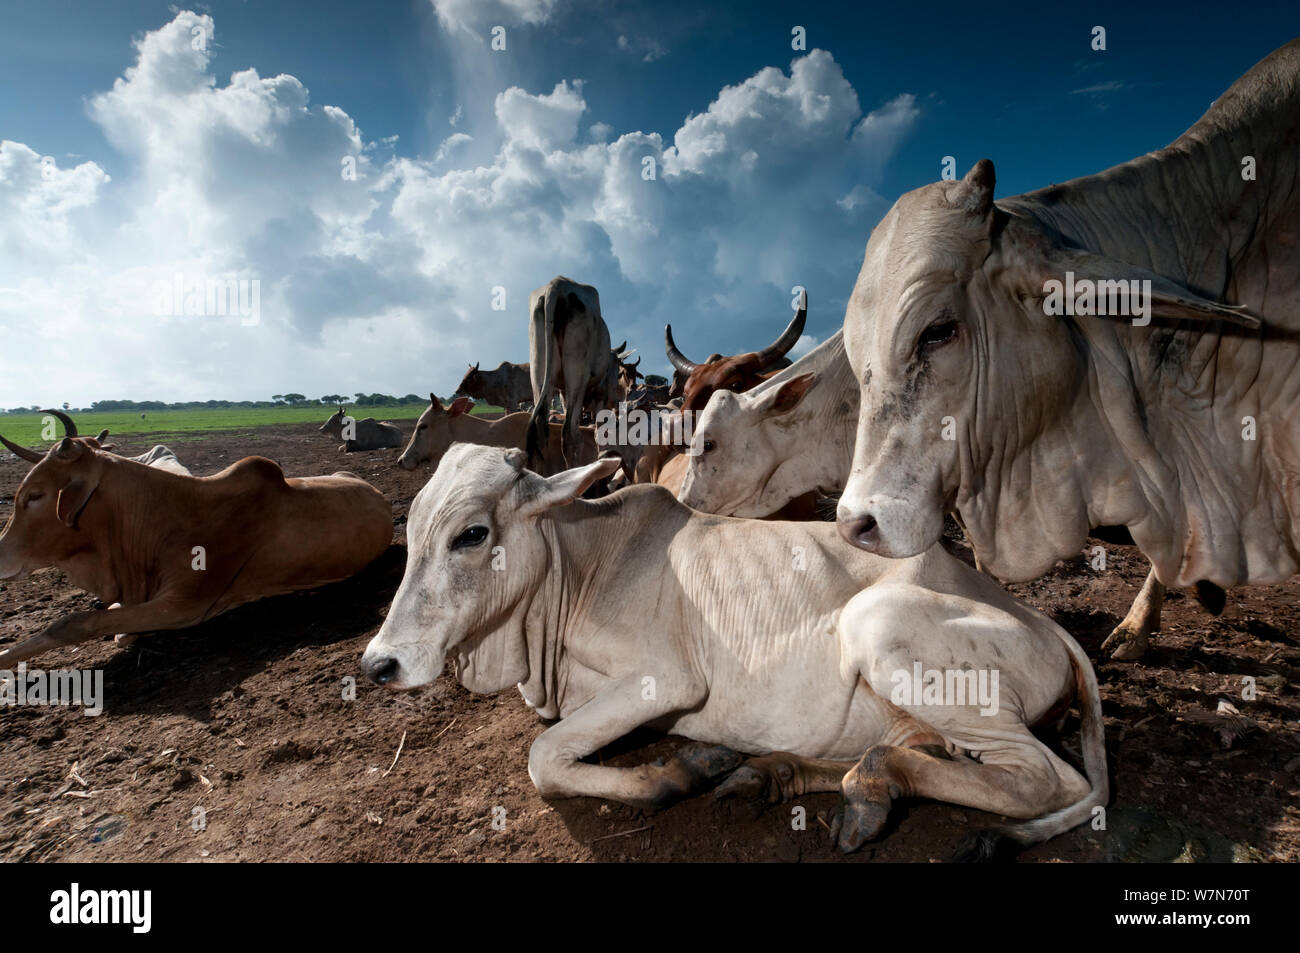 Cattle belonging to Orma Village, pastoralist tribe living in the Tana river delta, Kenya, East Africa 2012 Stock Photo